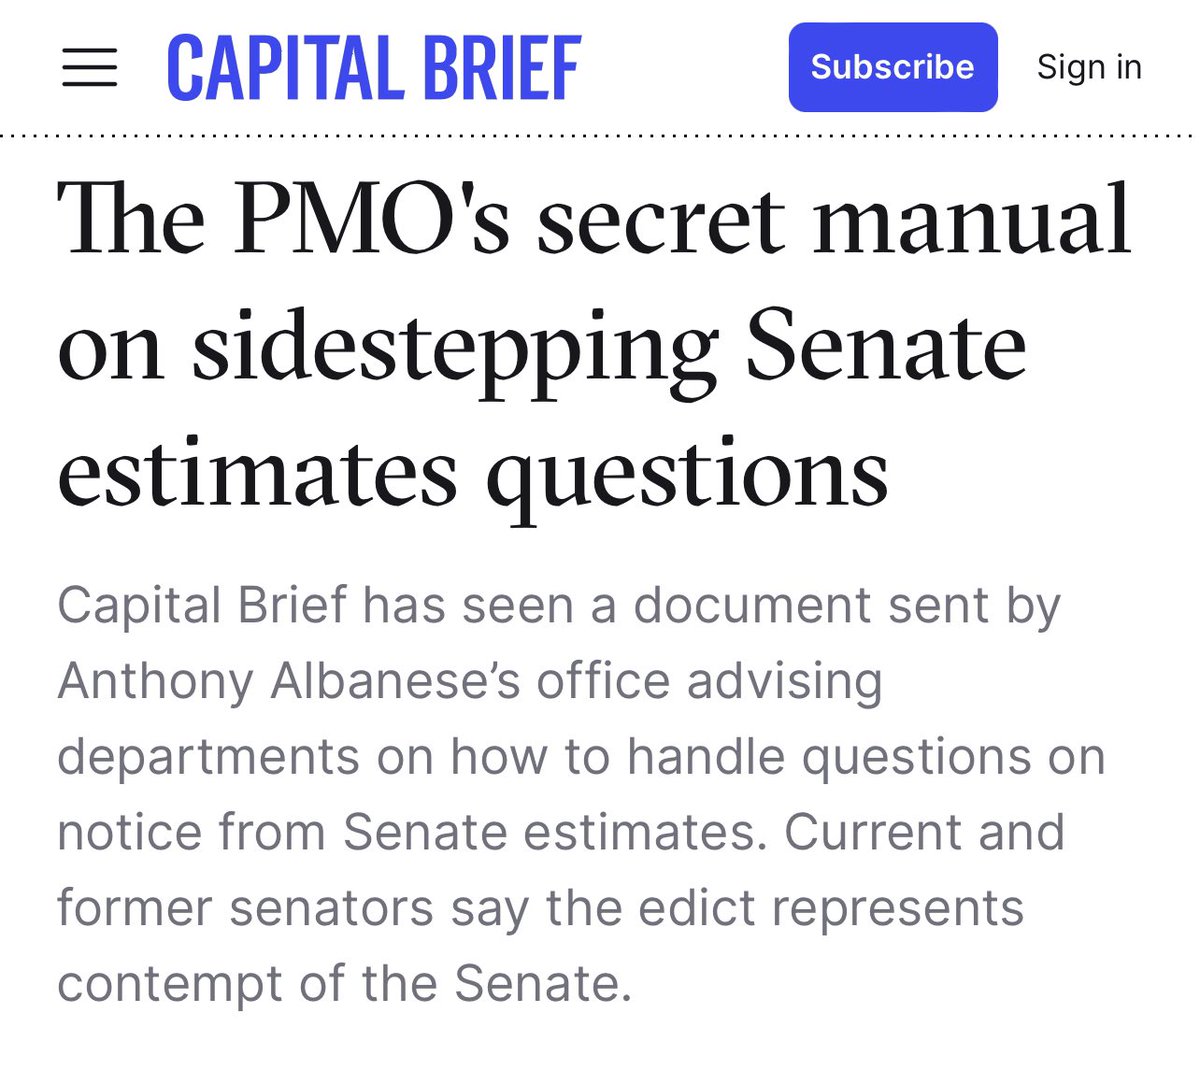 The Albanese Labor government has been accused of being in contempt of the Senate. A leaked document obtained by Capital Brief which came out of Prime Minister Anthony Albanese’s office, advises government departments how to avoid answering questions from Senators! So much for